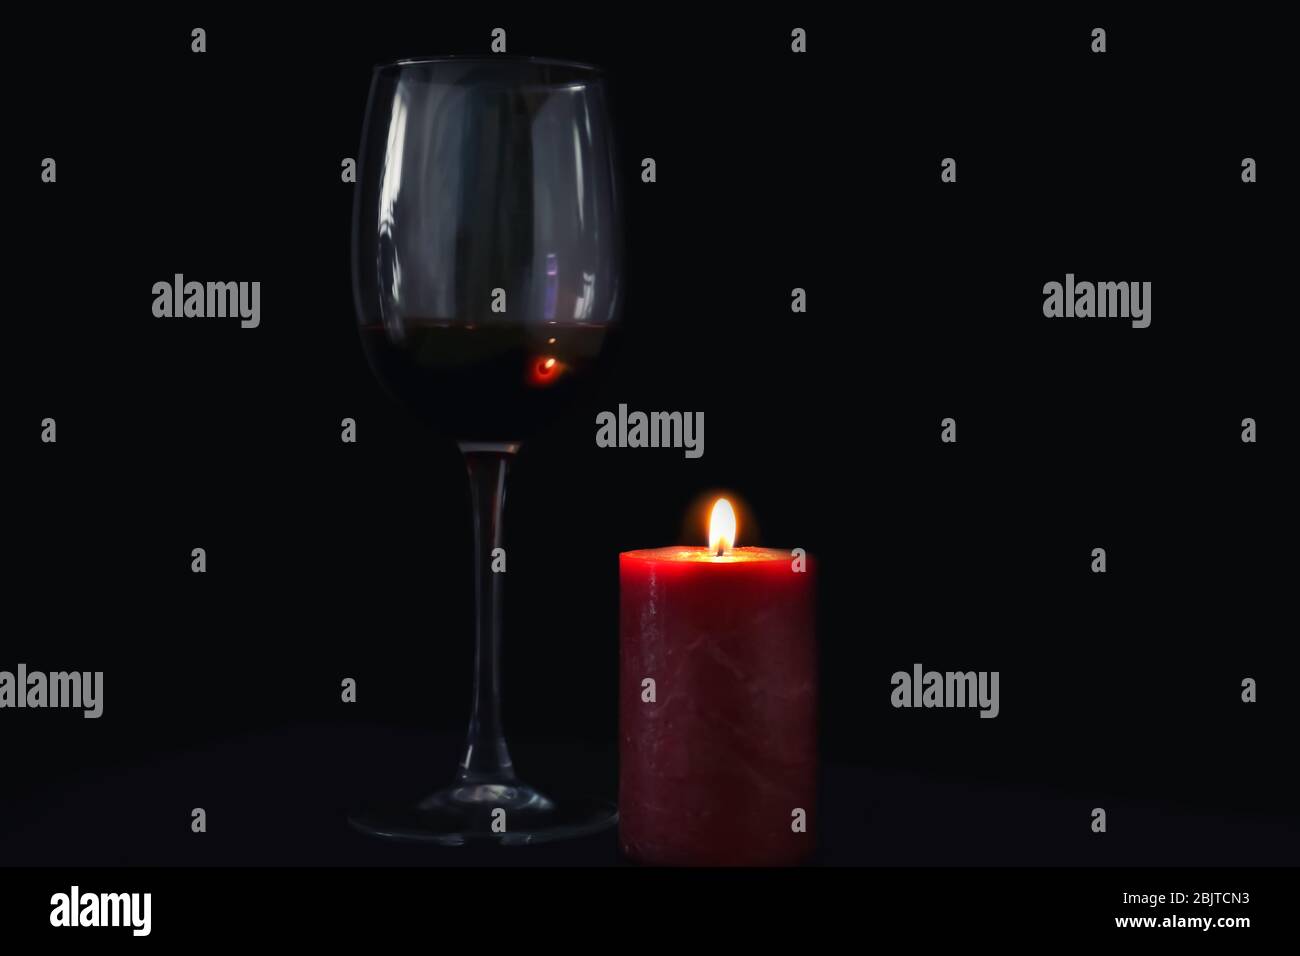 Burning candle and glass of wine on black background Stock Photo